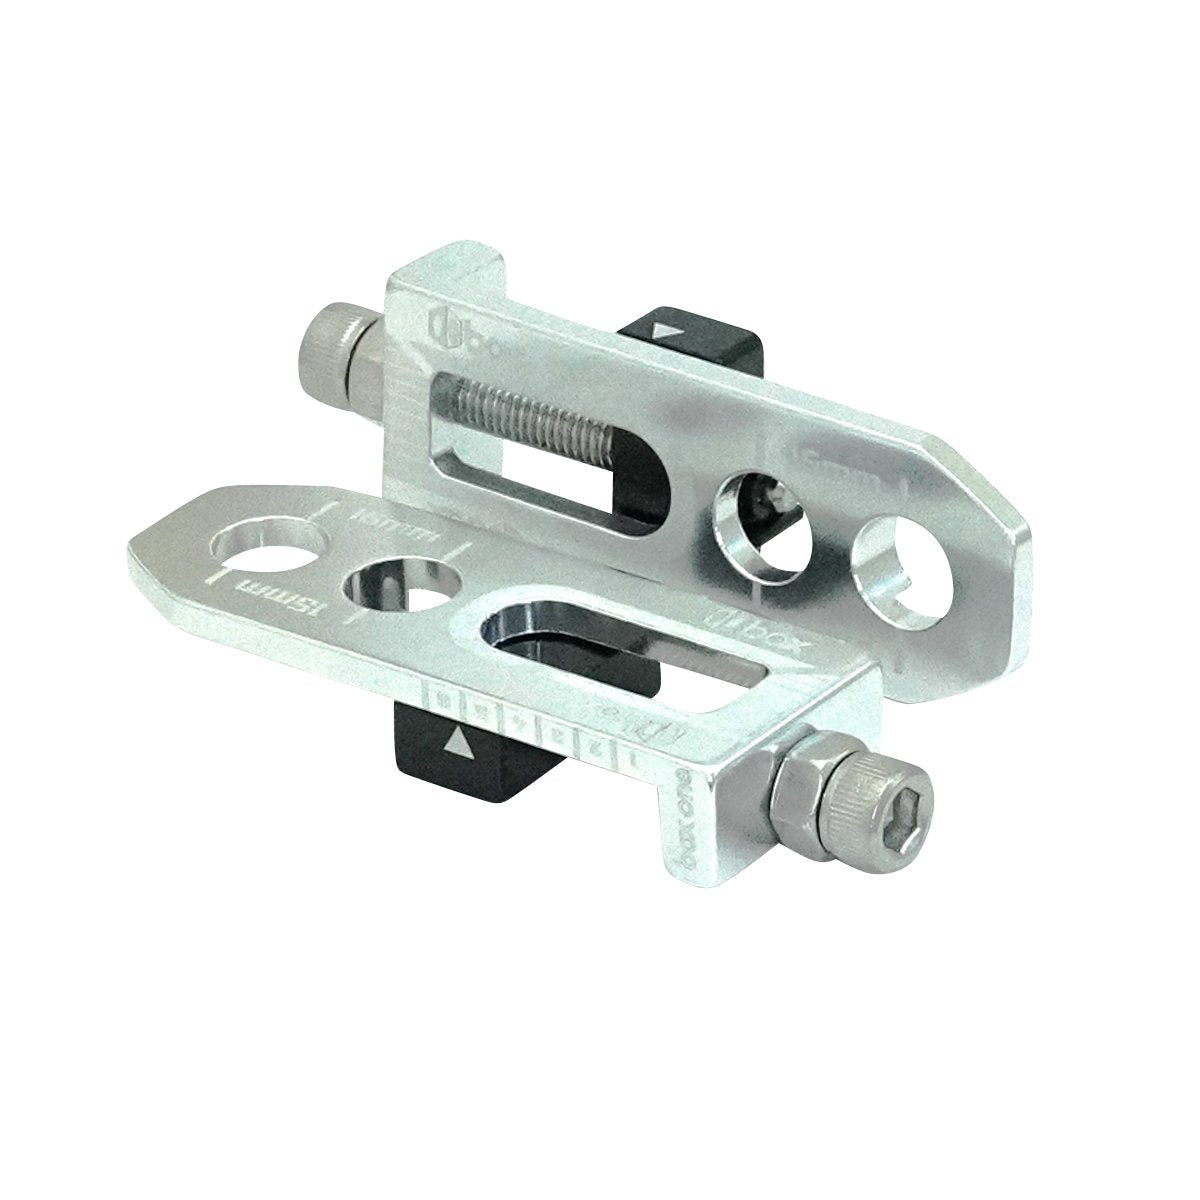 Box One 3/8" BMX Chain Tensioners - Pair - Silver